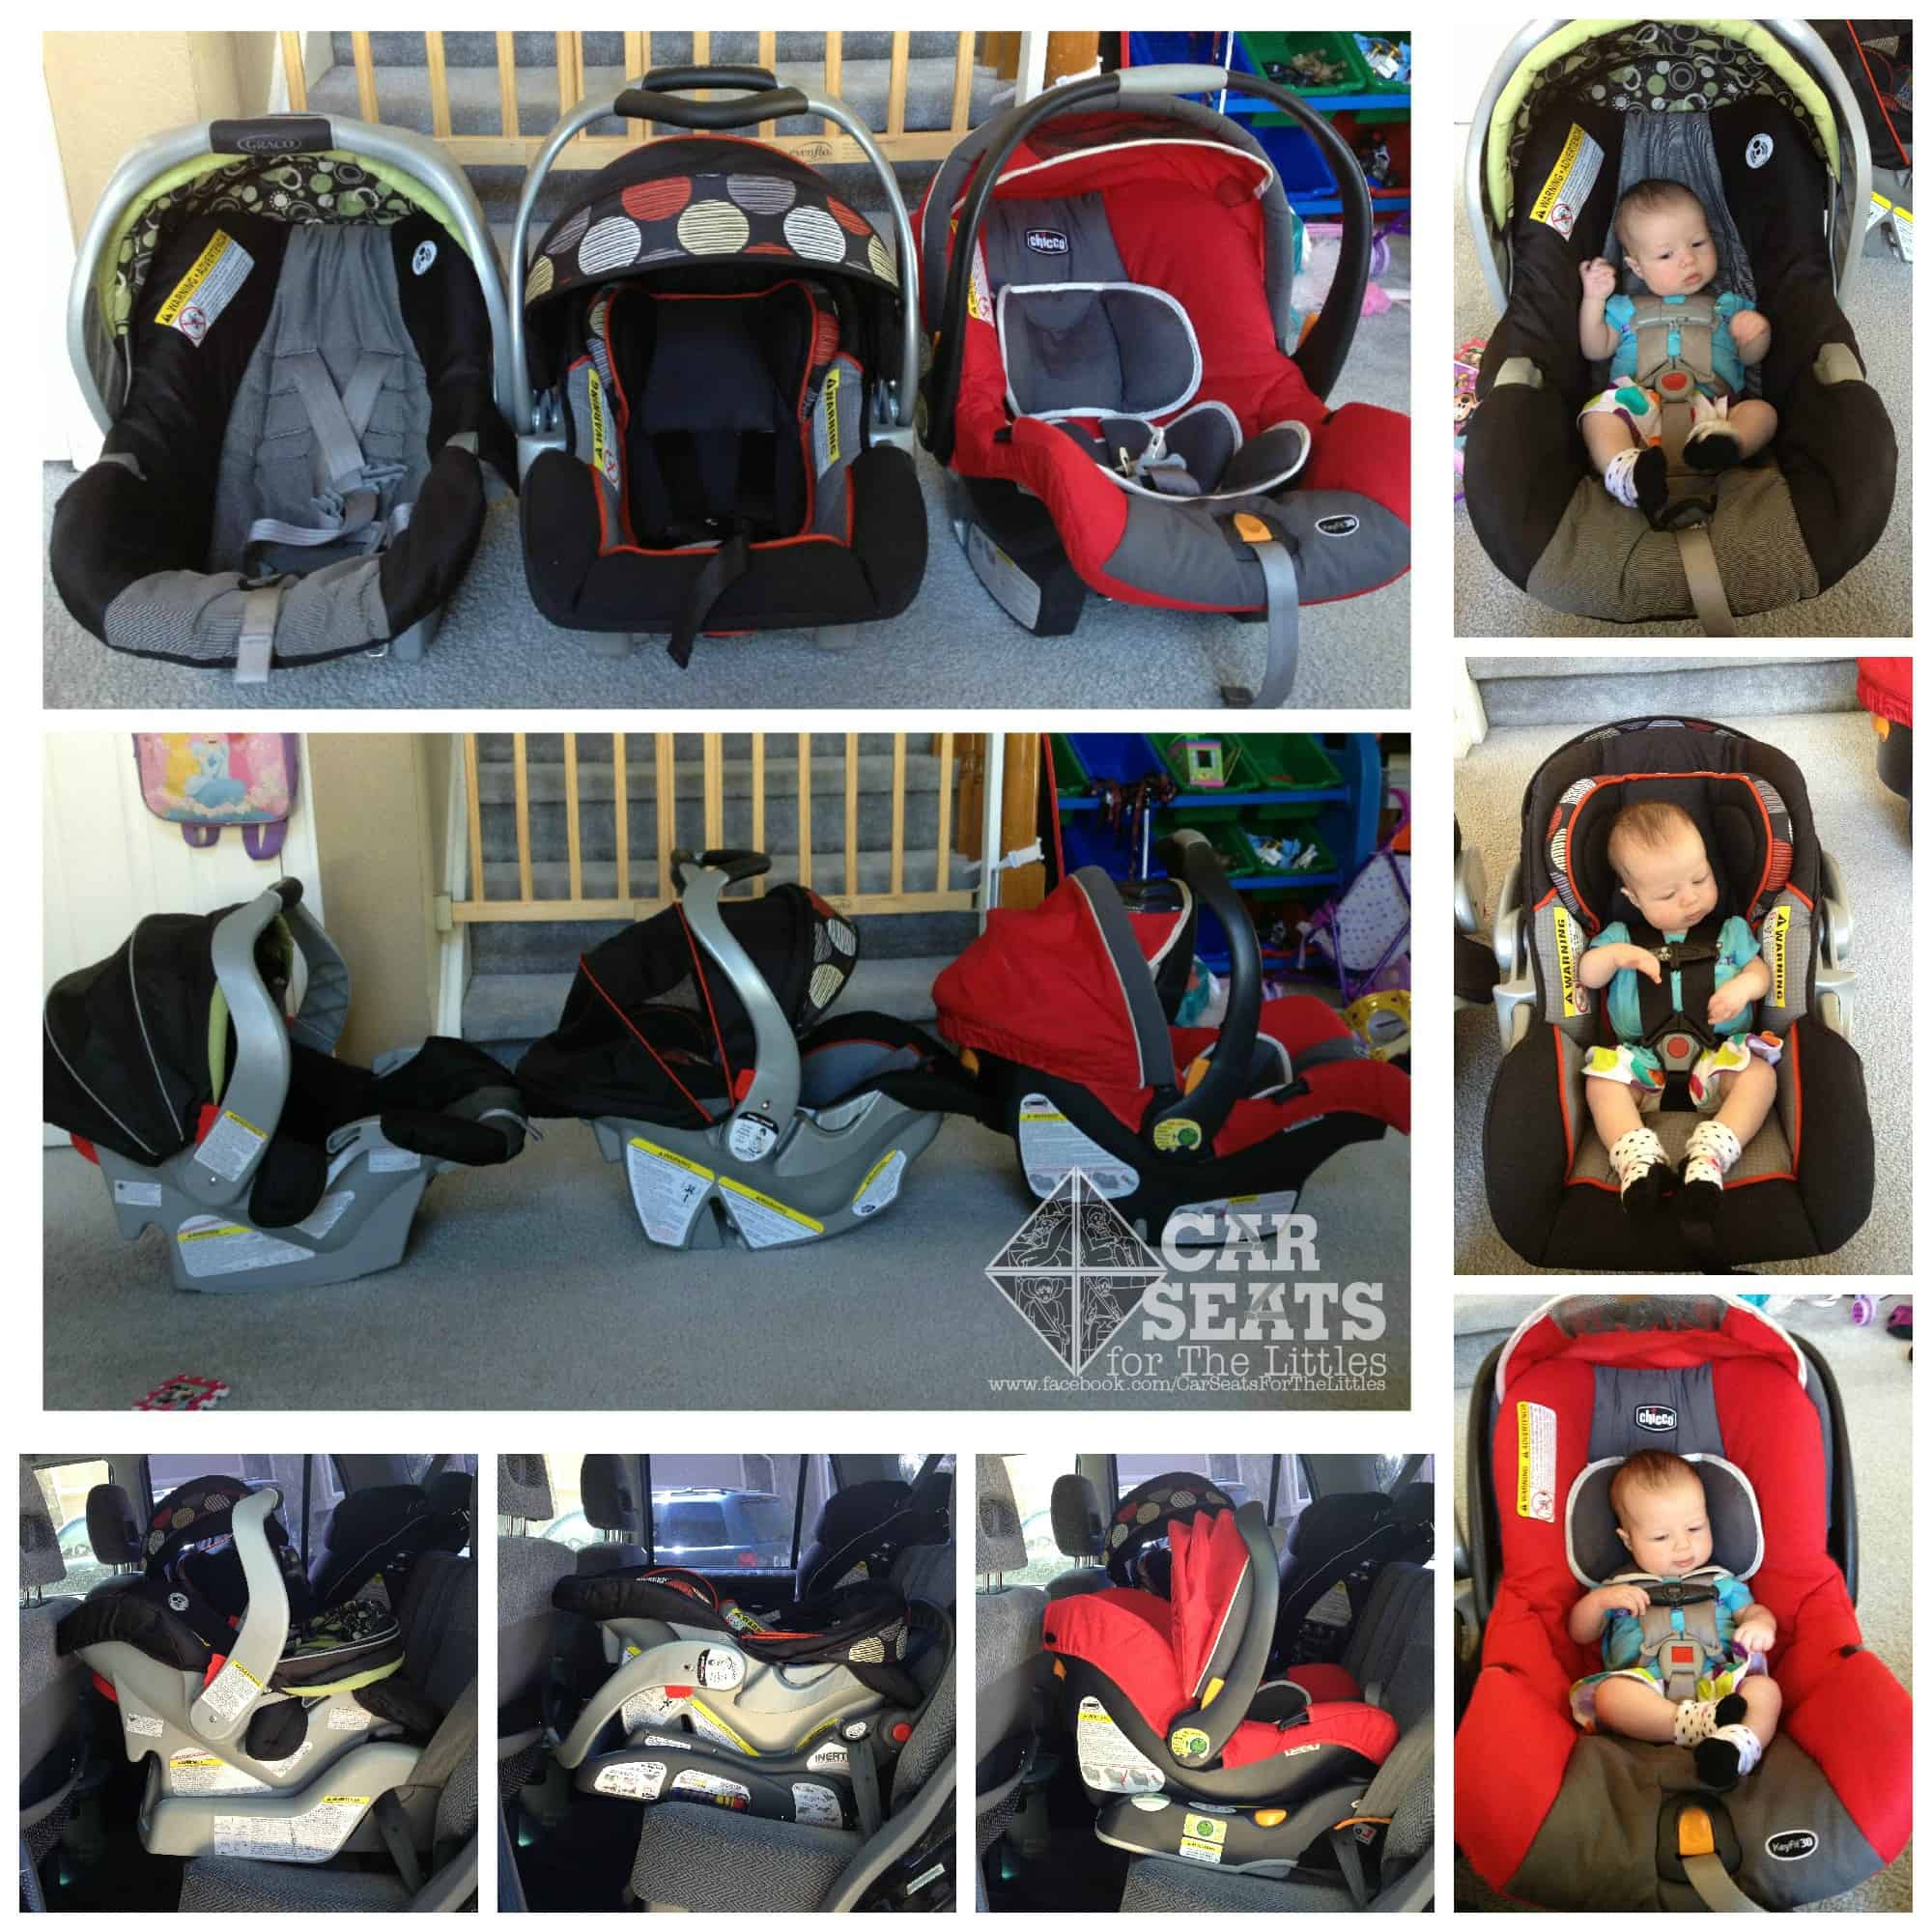 Baby Trend Inertia Review Car Seats For The Littles - How Long Is Baby Trend Car Seat Good For